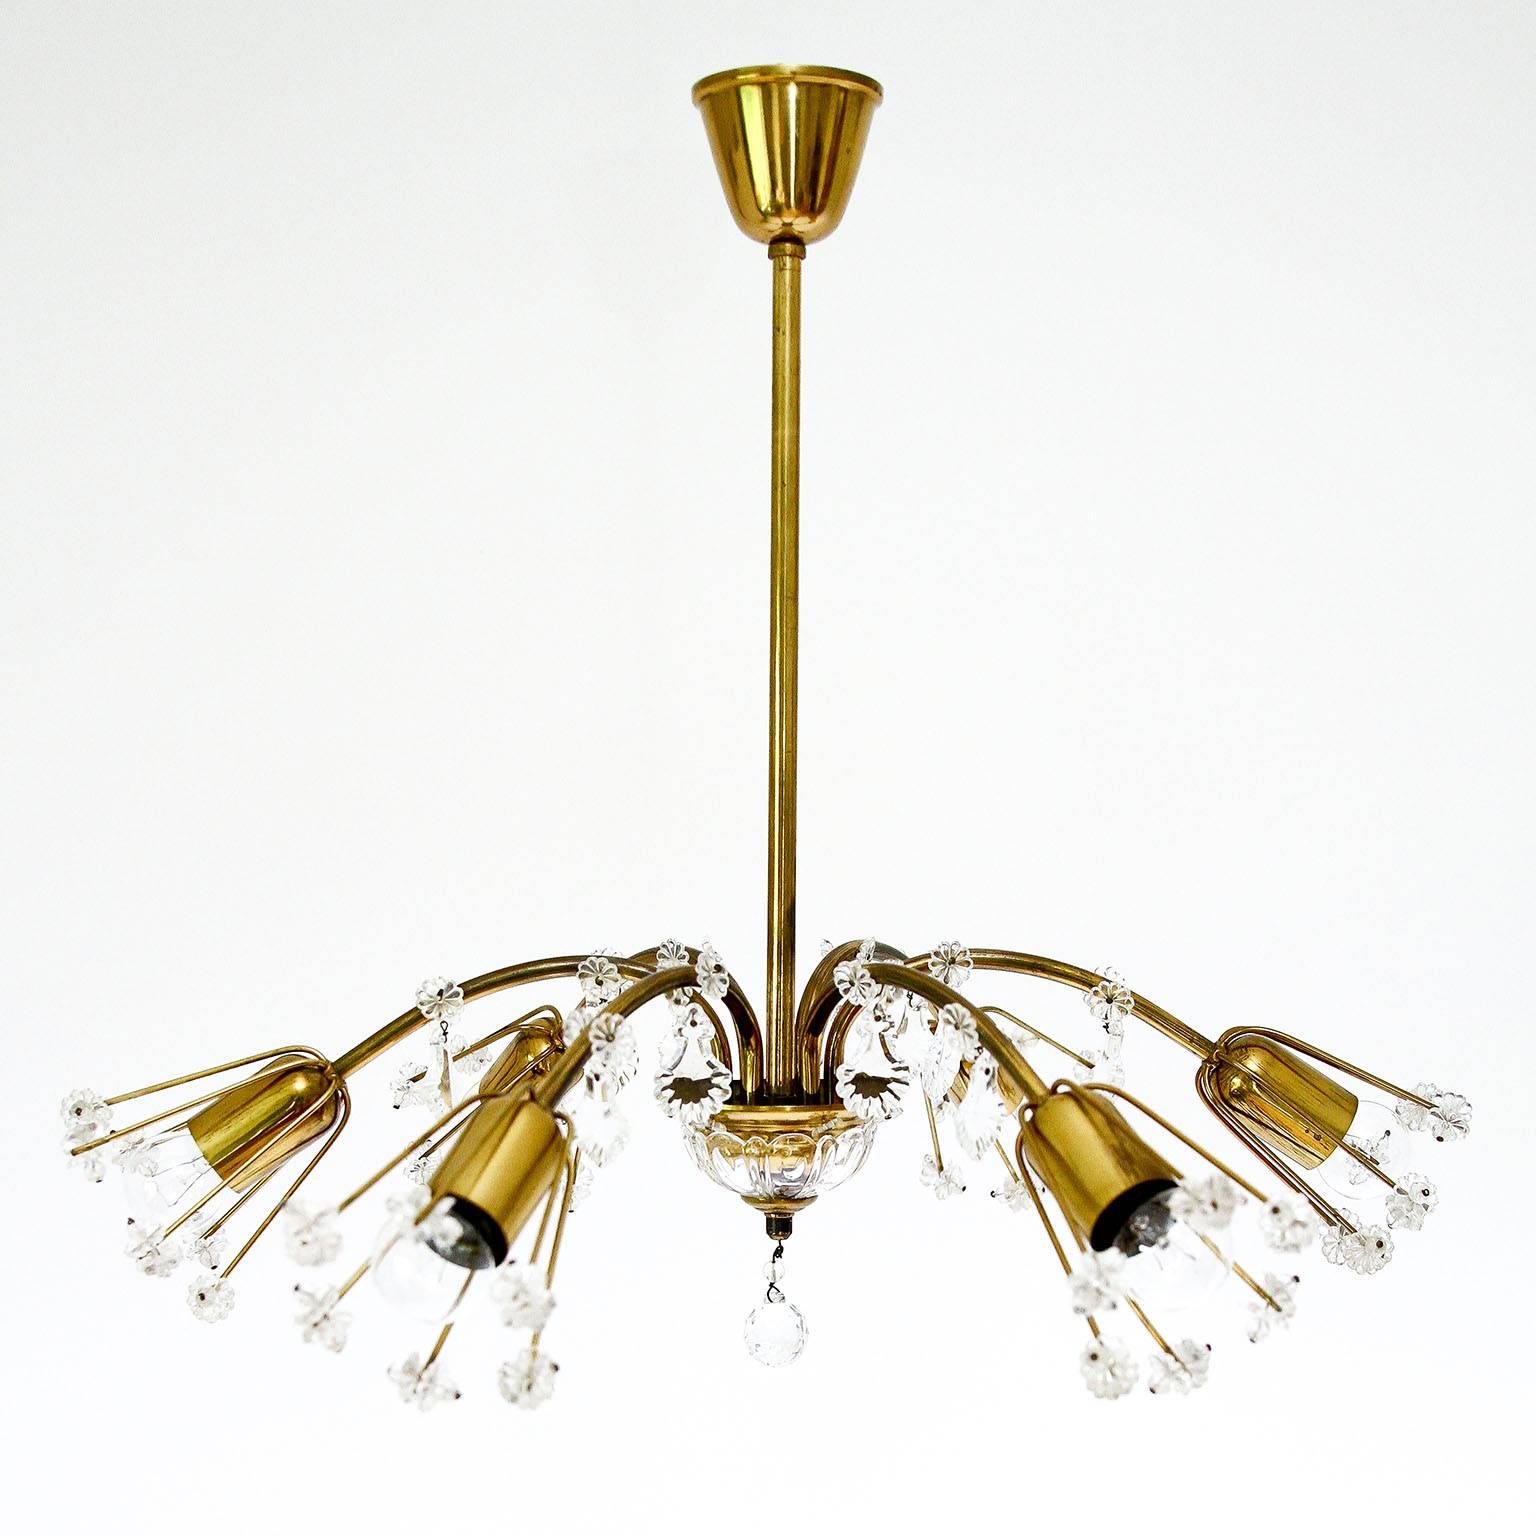 Mid-20th Century Pair of Emil Stejnar Chandeliers or Flush Mount Lights, Patinated Brass, 1950s